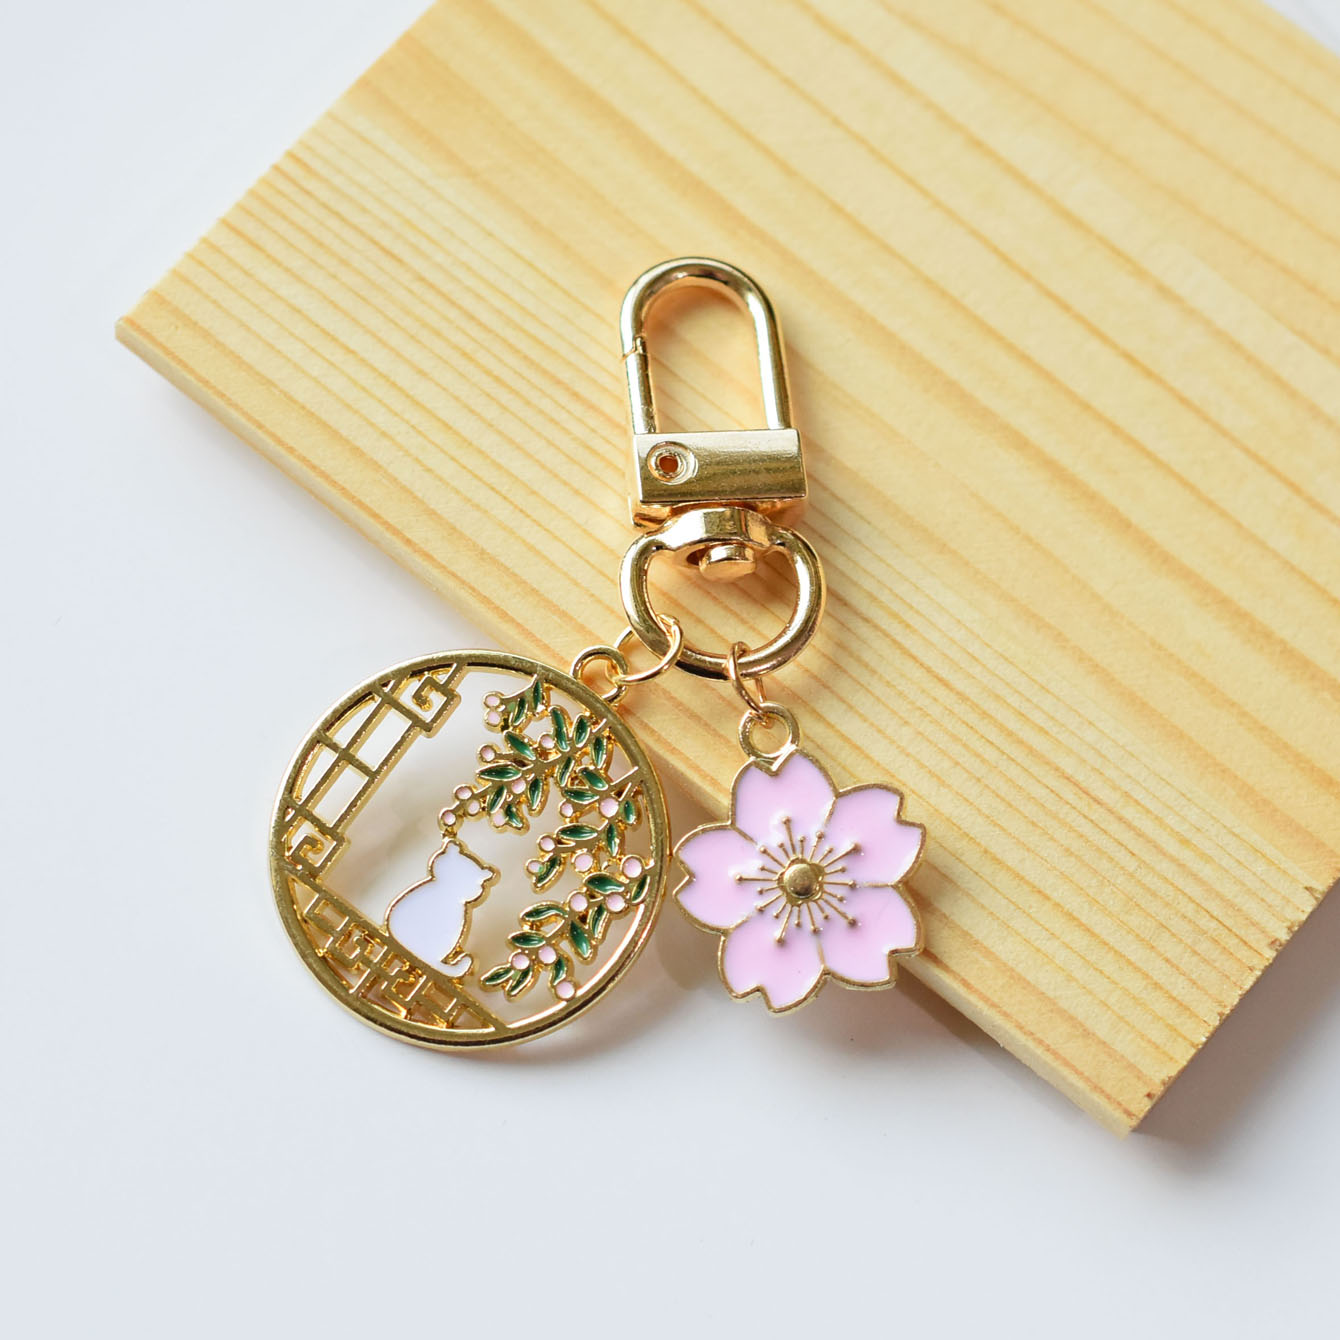 Cherry Blossom Accessories Cars  Key Chain Cute Cherry Blossoms - New  Acrylic - Aliexpress